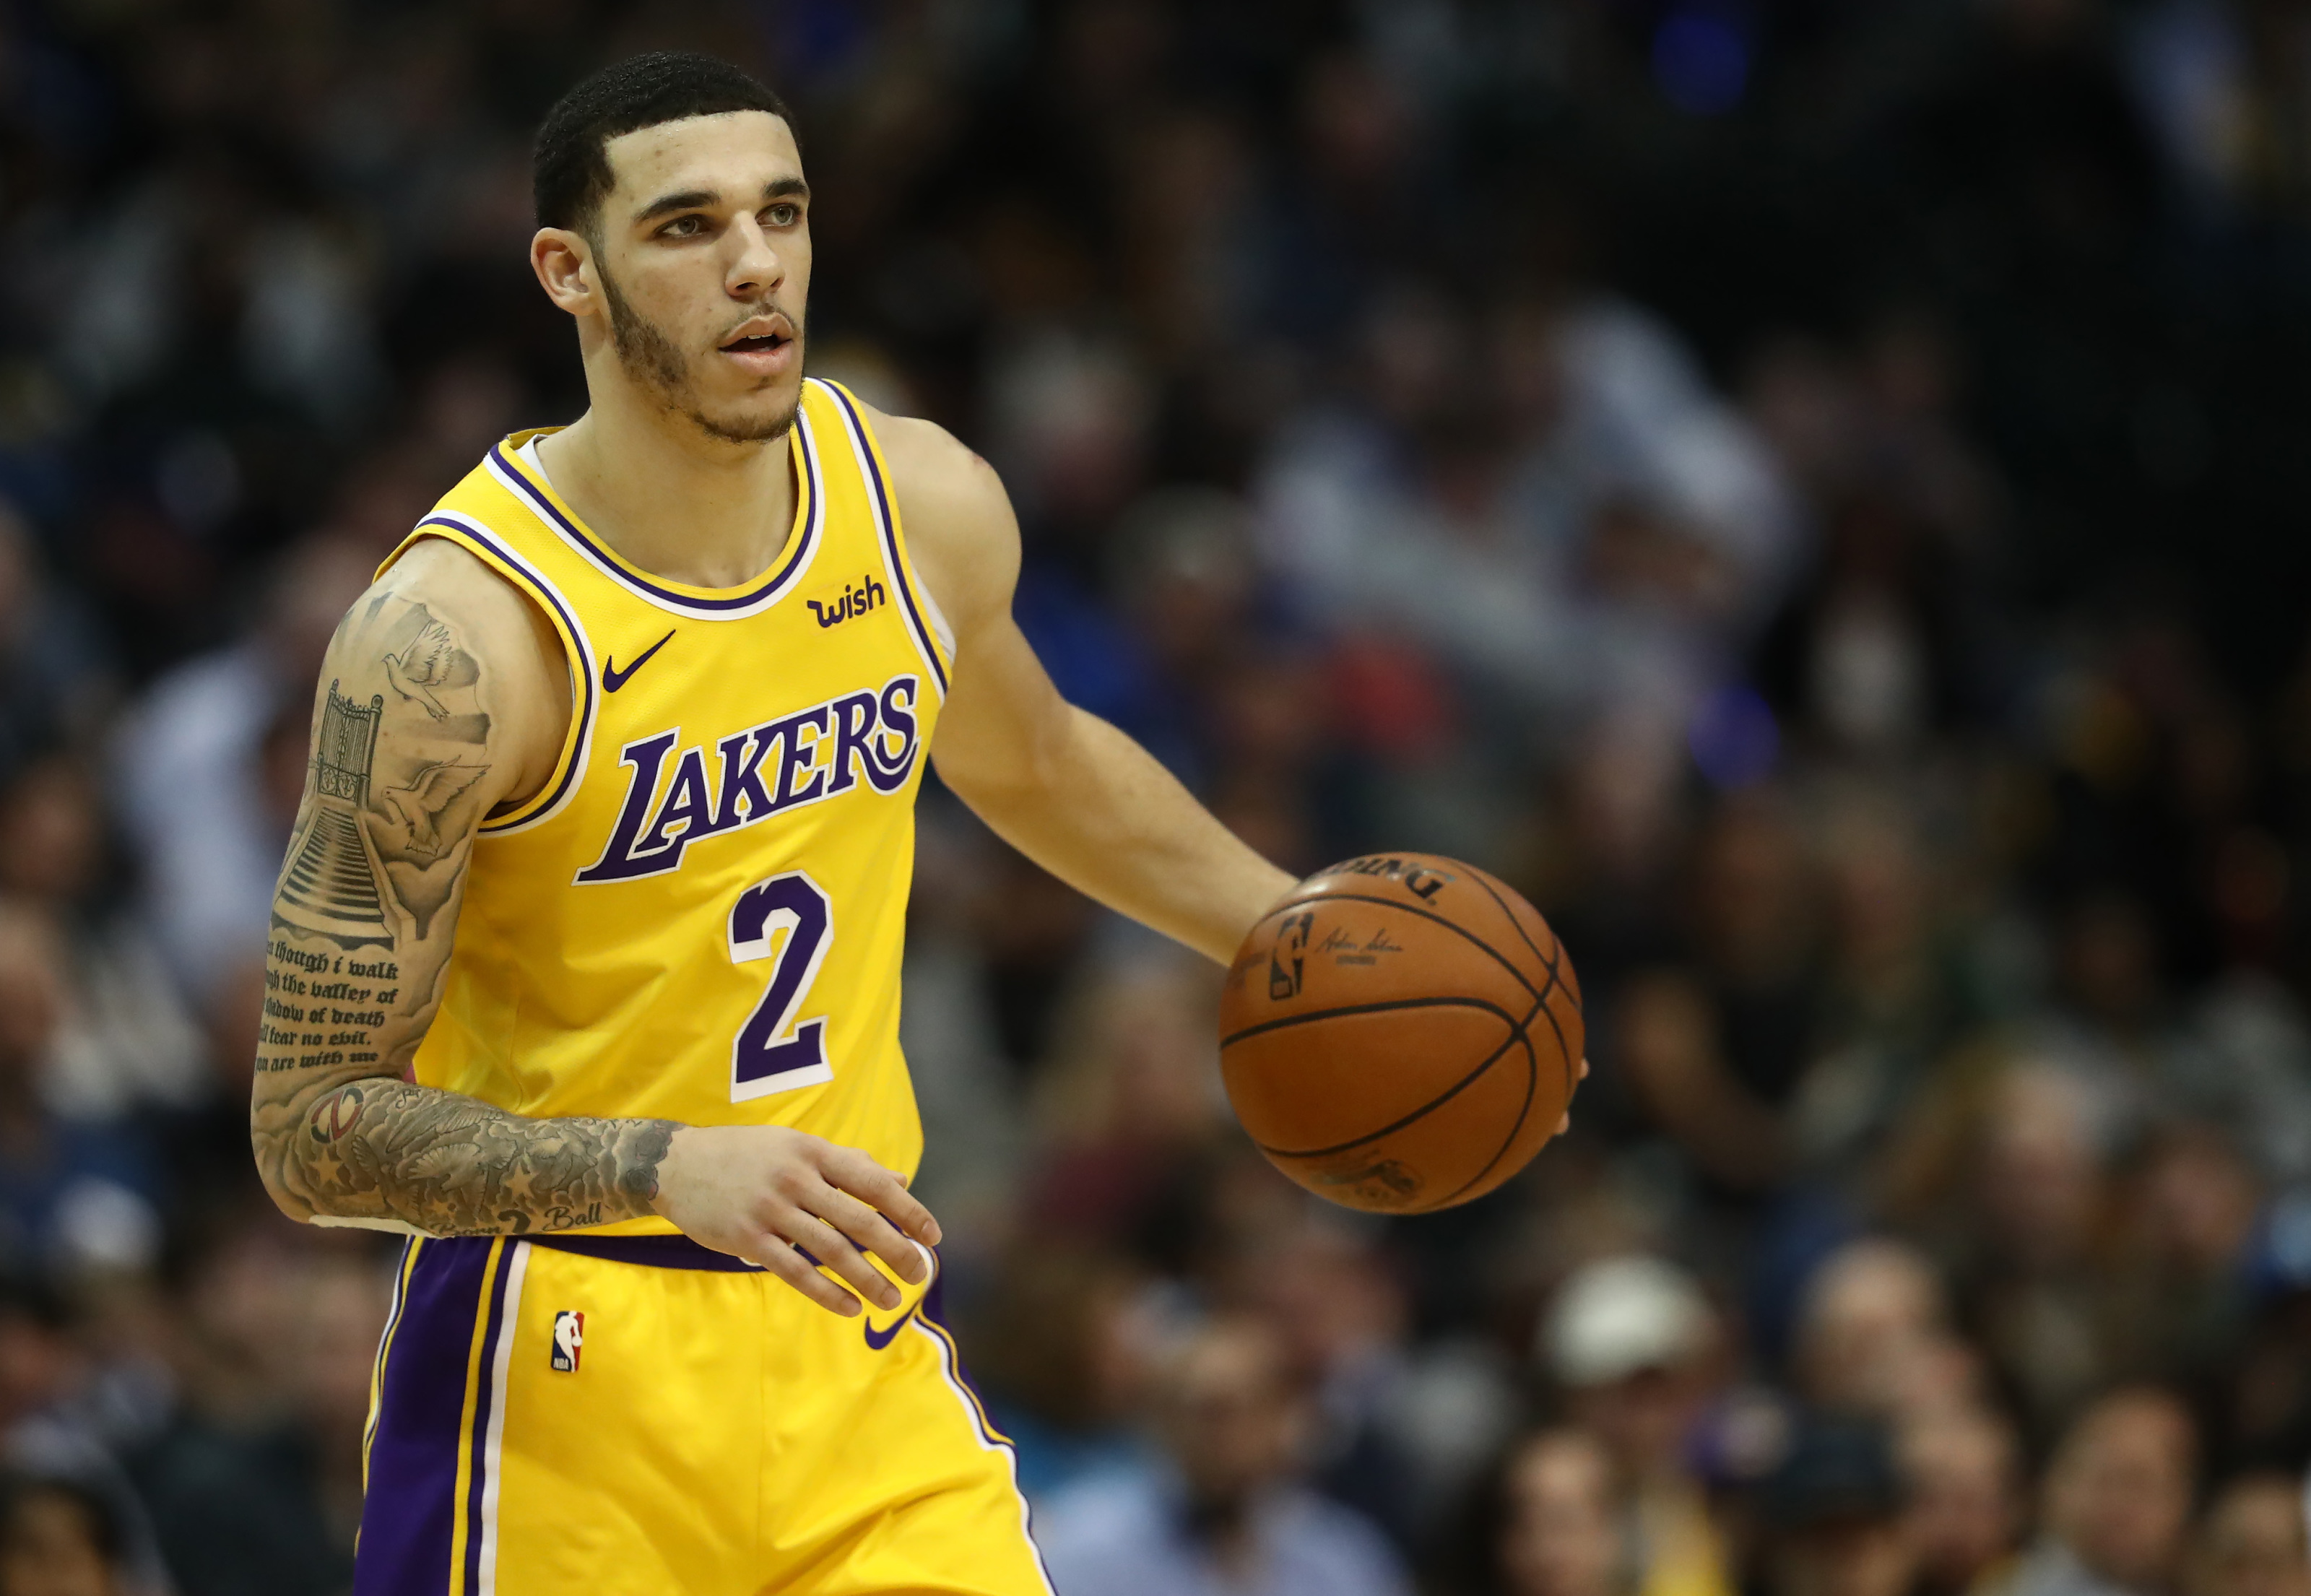 Why the Lakers should draft Lonzo Ball